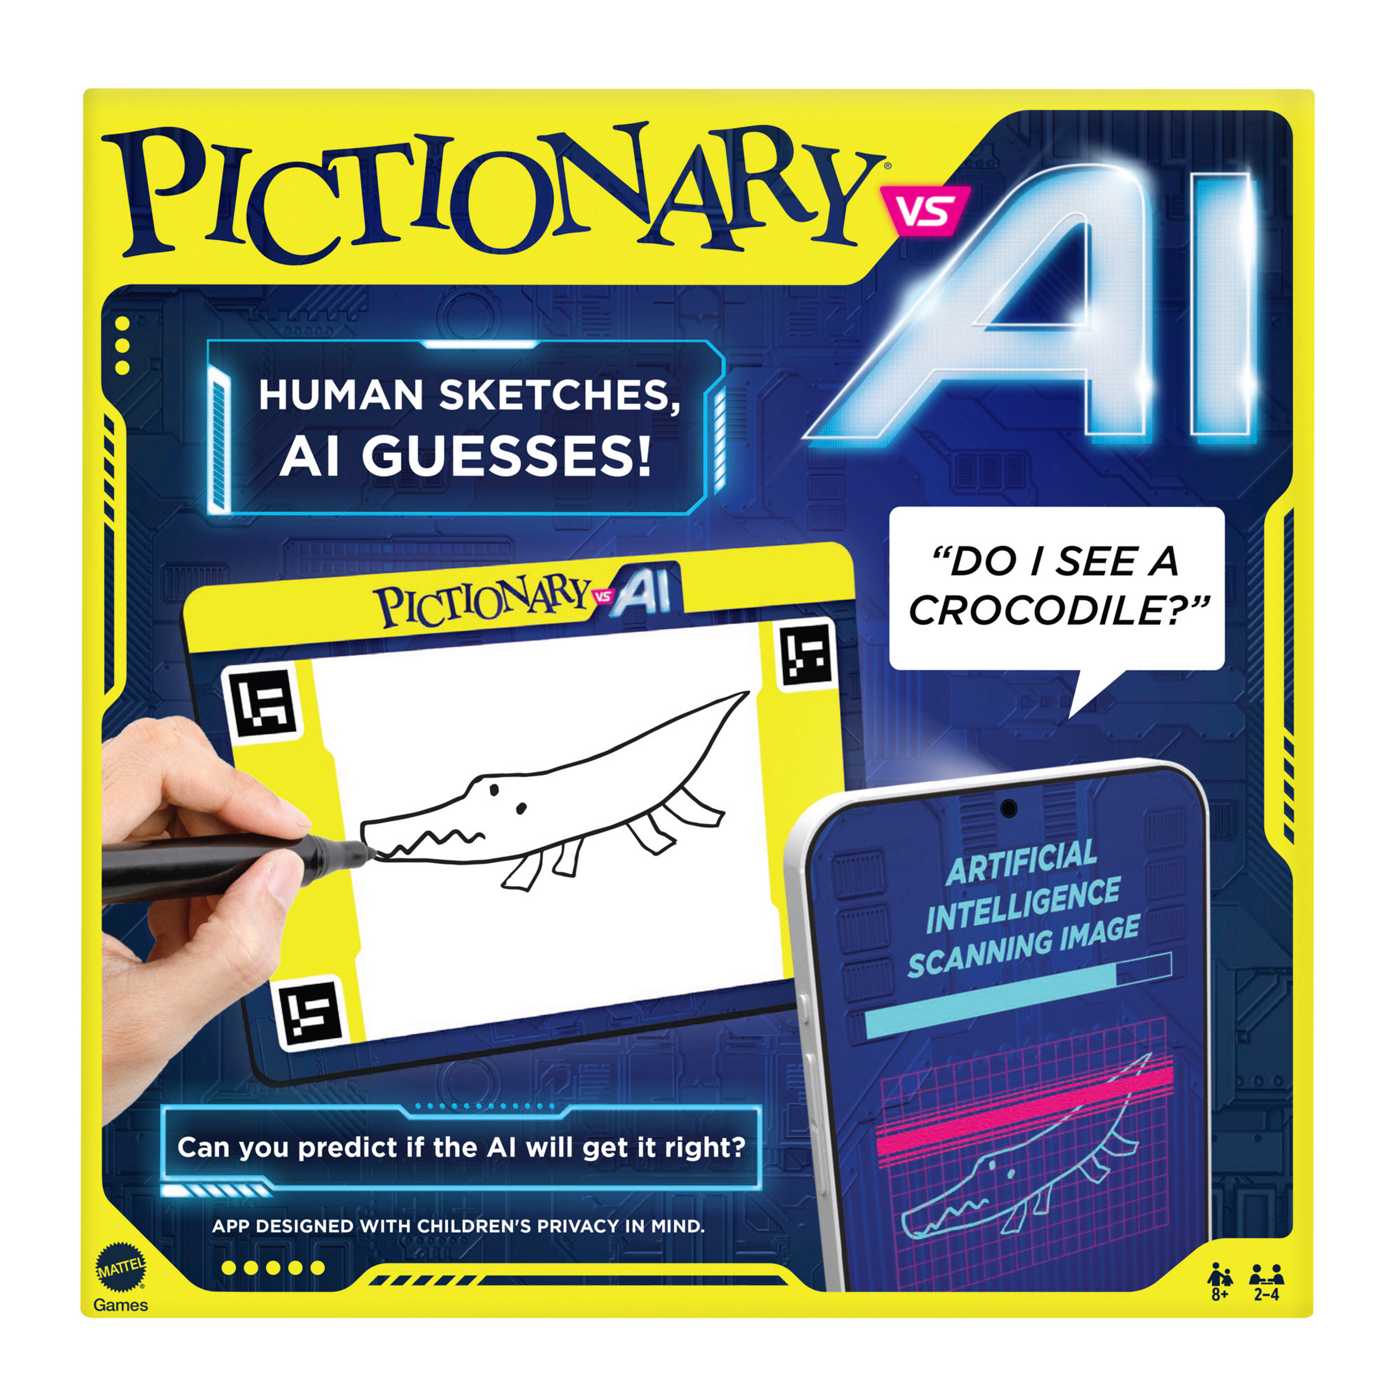 Pictionary Vs. A.I. Game; image 1 of 4